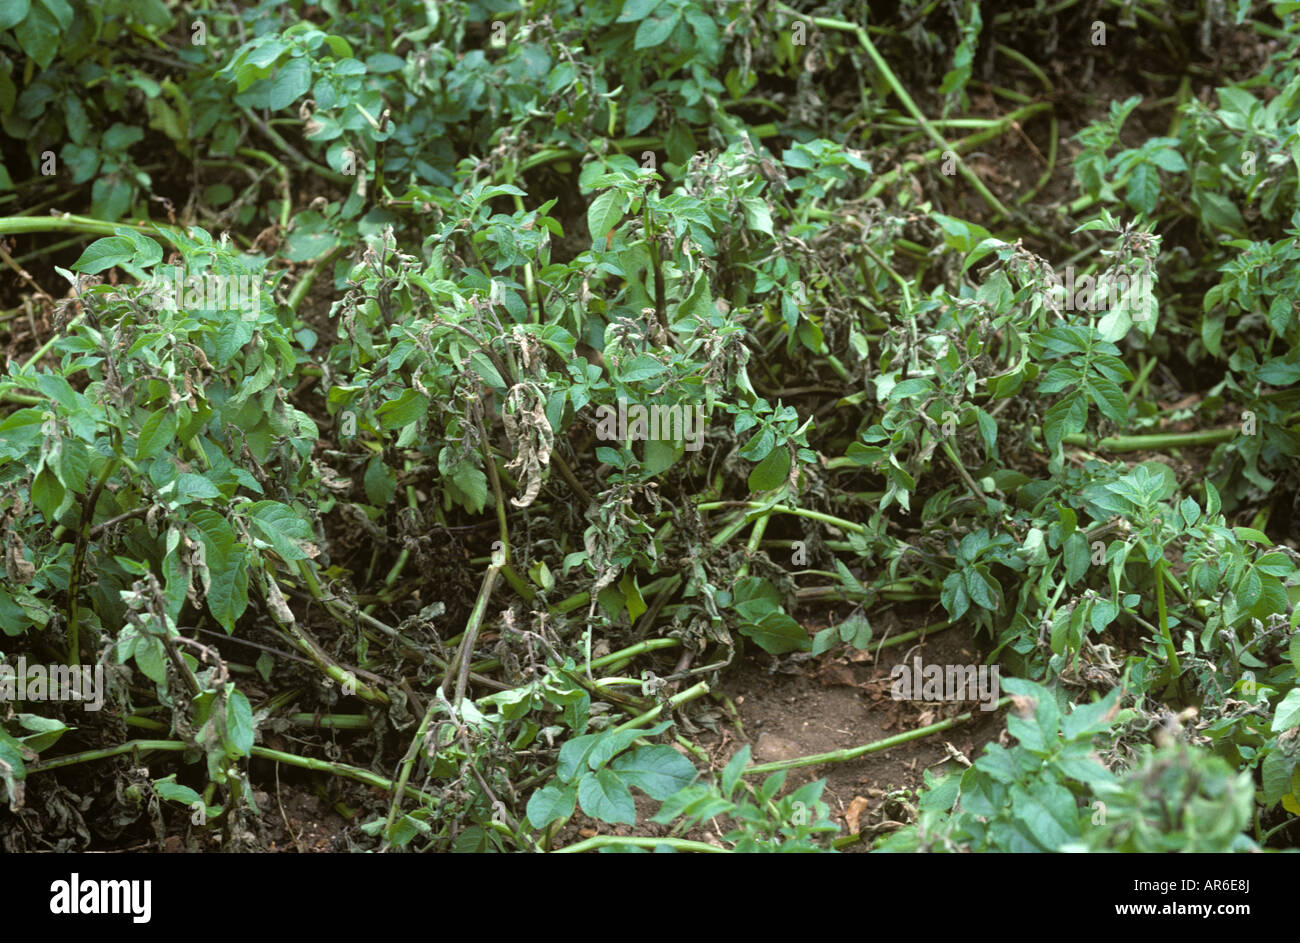 Potato late blight Phytophthora infestans disease infection in a potato crop Stock Photo